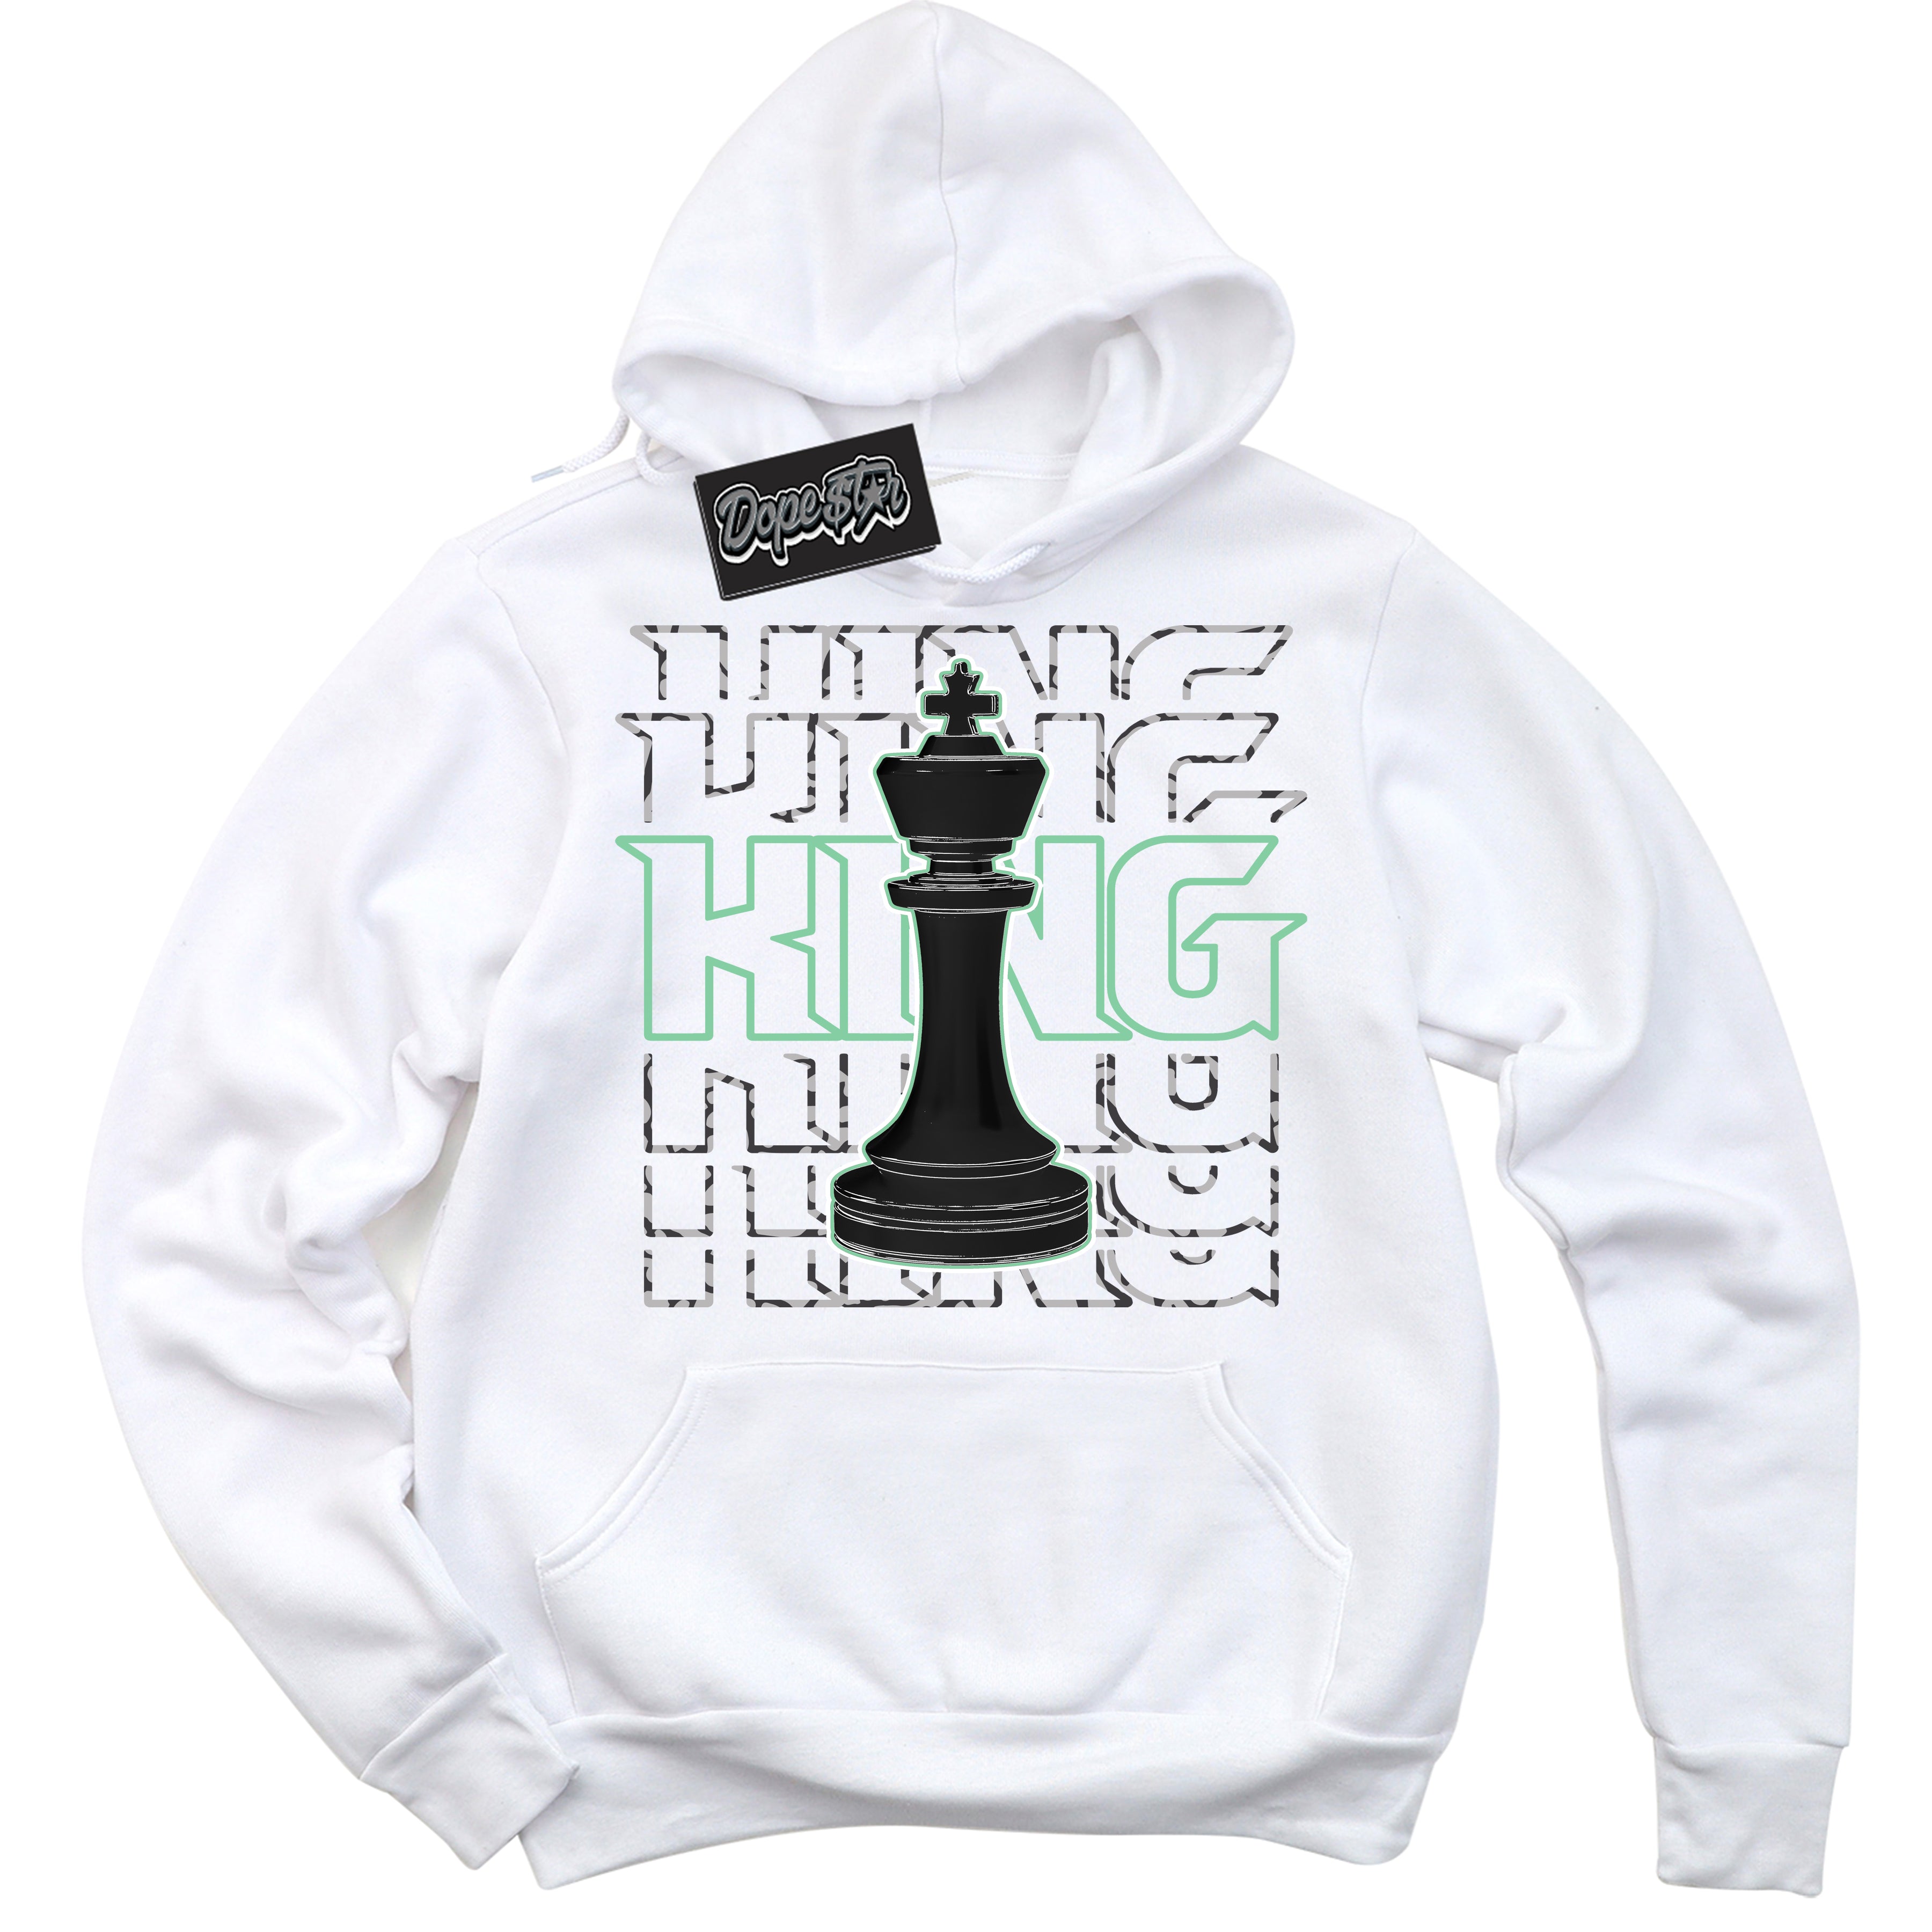 Cool White Graphic DopeStar Hoodie with “ King Chess “ print, that perfectly matches Green Glow 3s sneakers